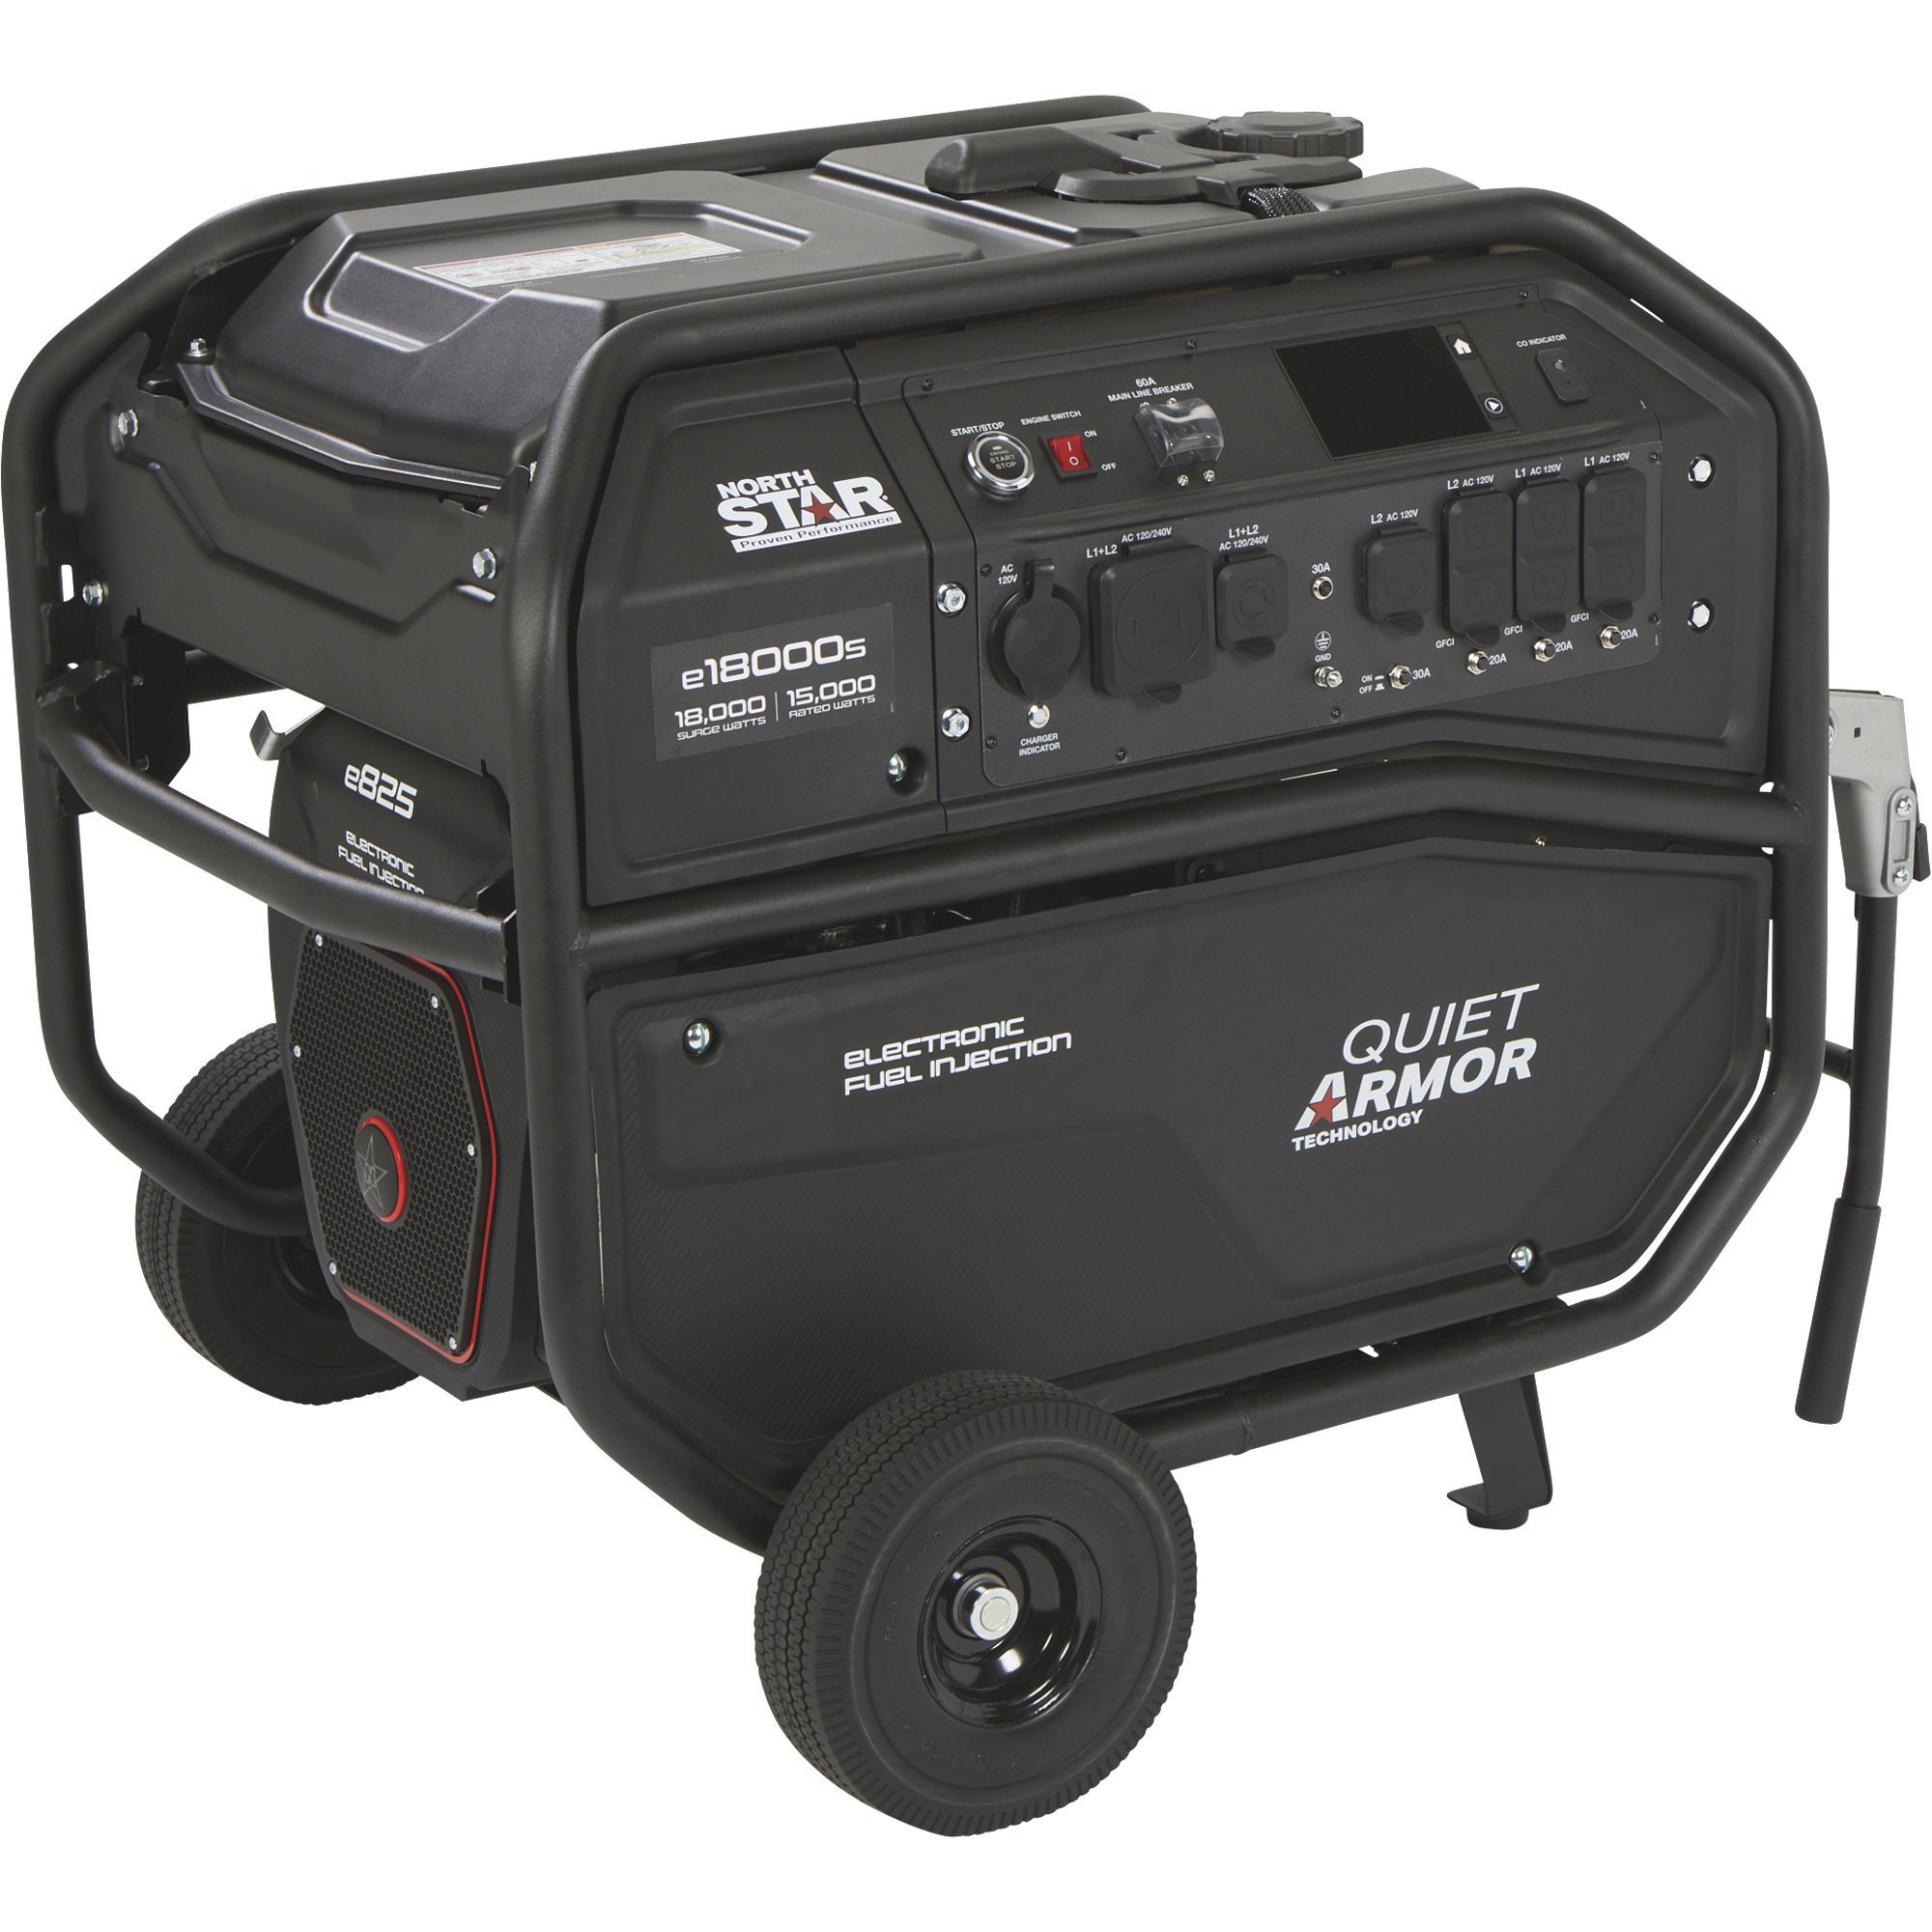 NorthStar e18000s Commercial-Grade EFI Portable Generator with Electric Start, 18,000 Surge Watts, 15,000 Rated Watts, Model 1654407